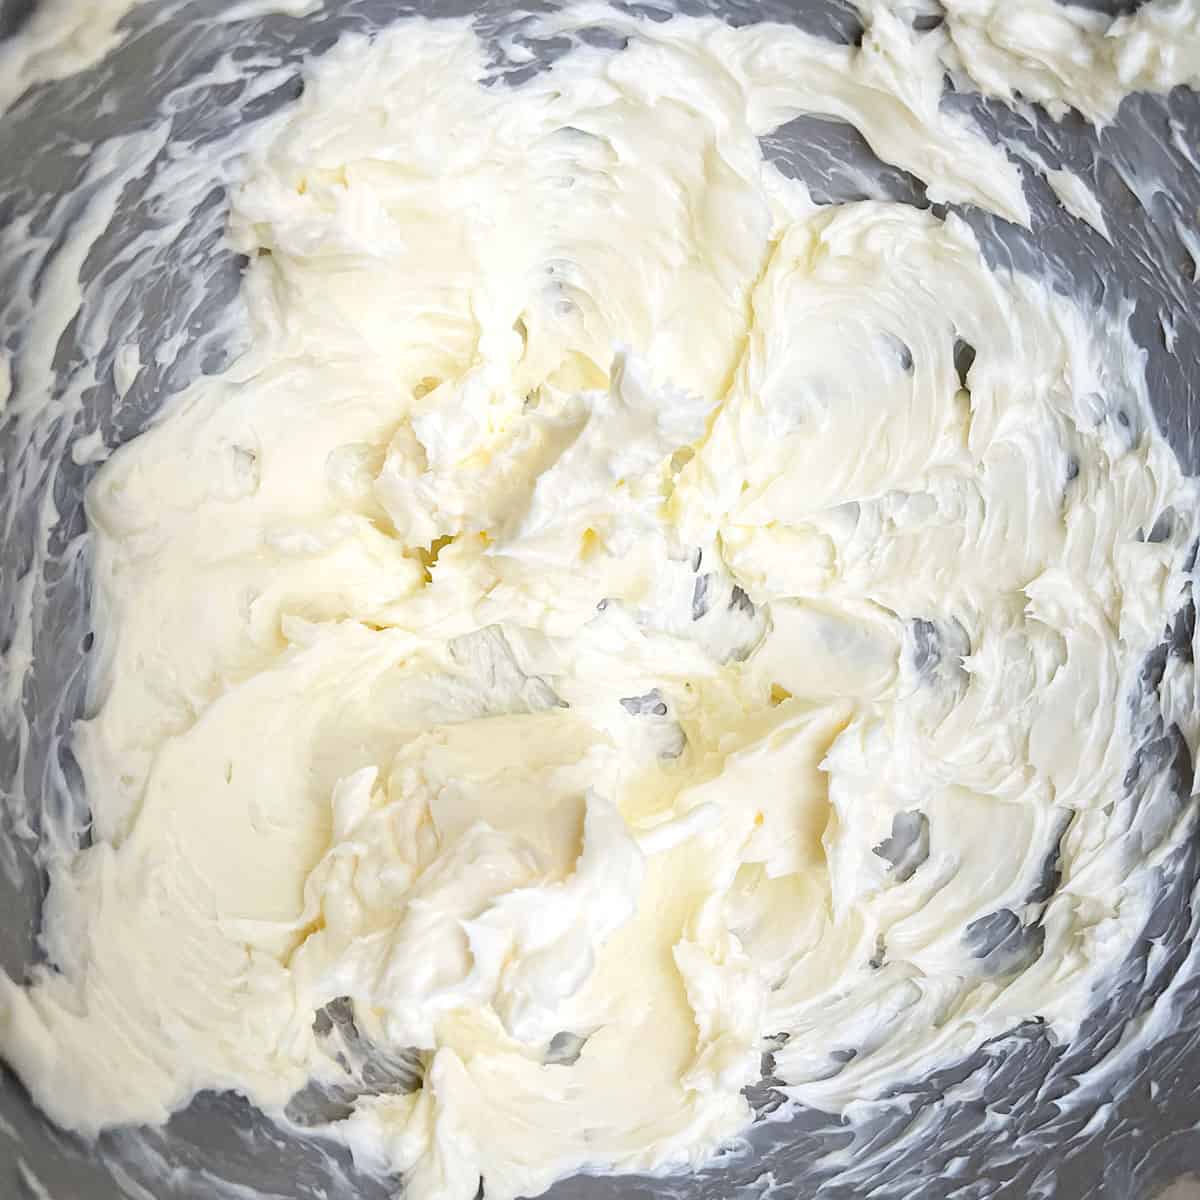 Creamed butter in a mixer bowl. It has soft peaks after mixing for 3 minutes.